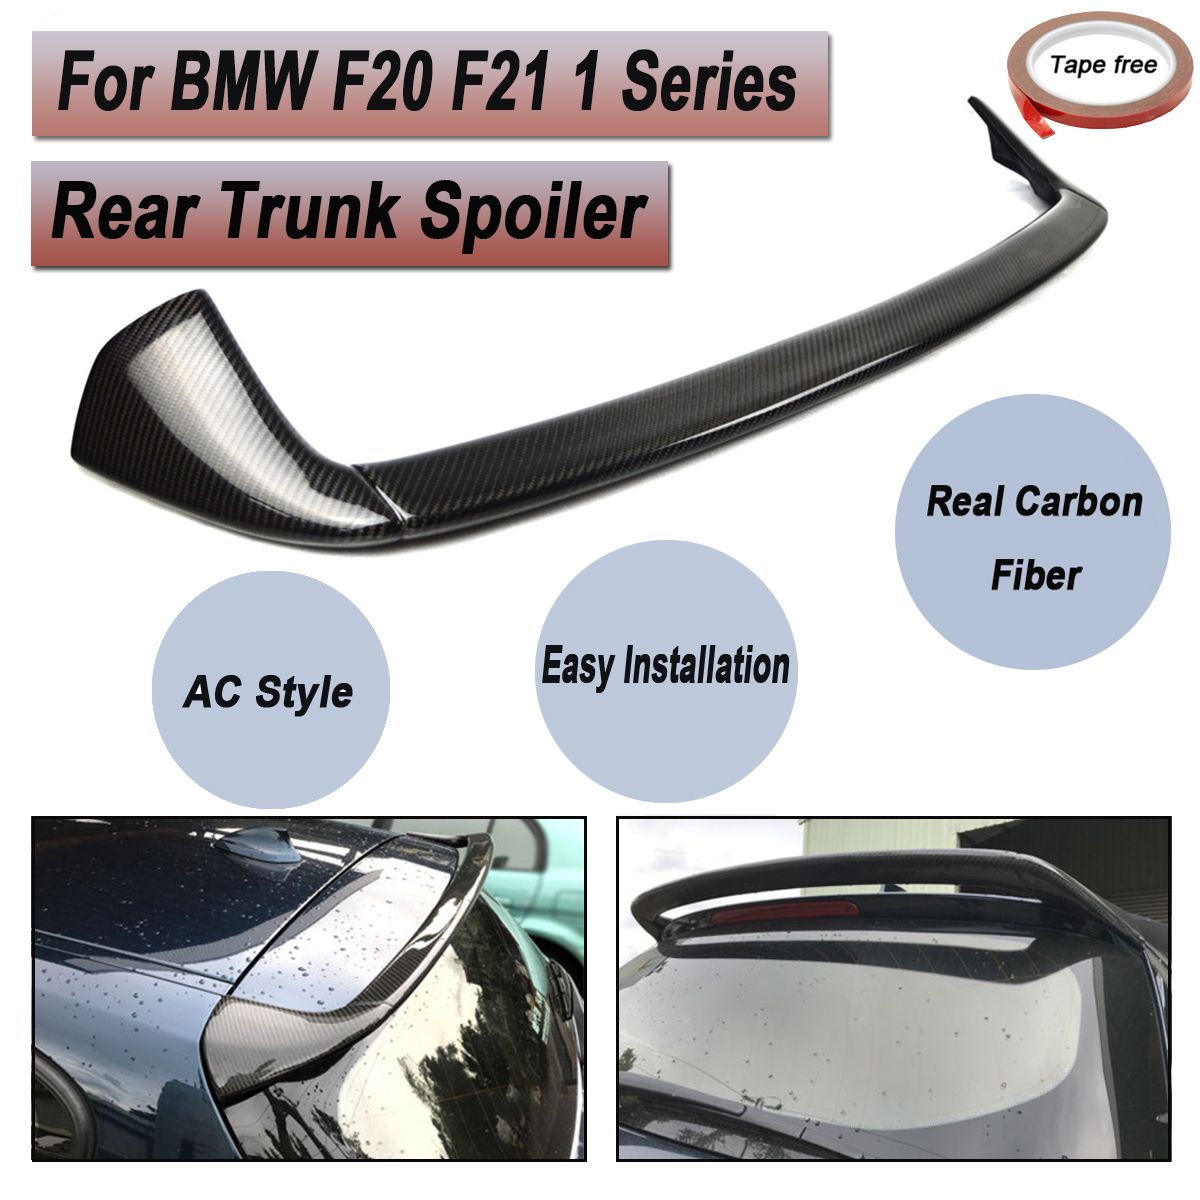 Carbon-Fiber-Car-Rear-Roof-Windshield-Spoiler-Lip-Wing-for-BMW-F20-F21-2010-2017-Series-1-1509205